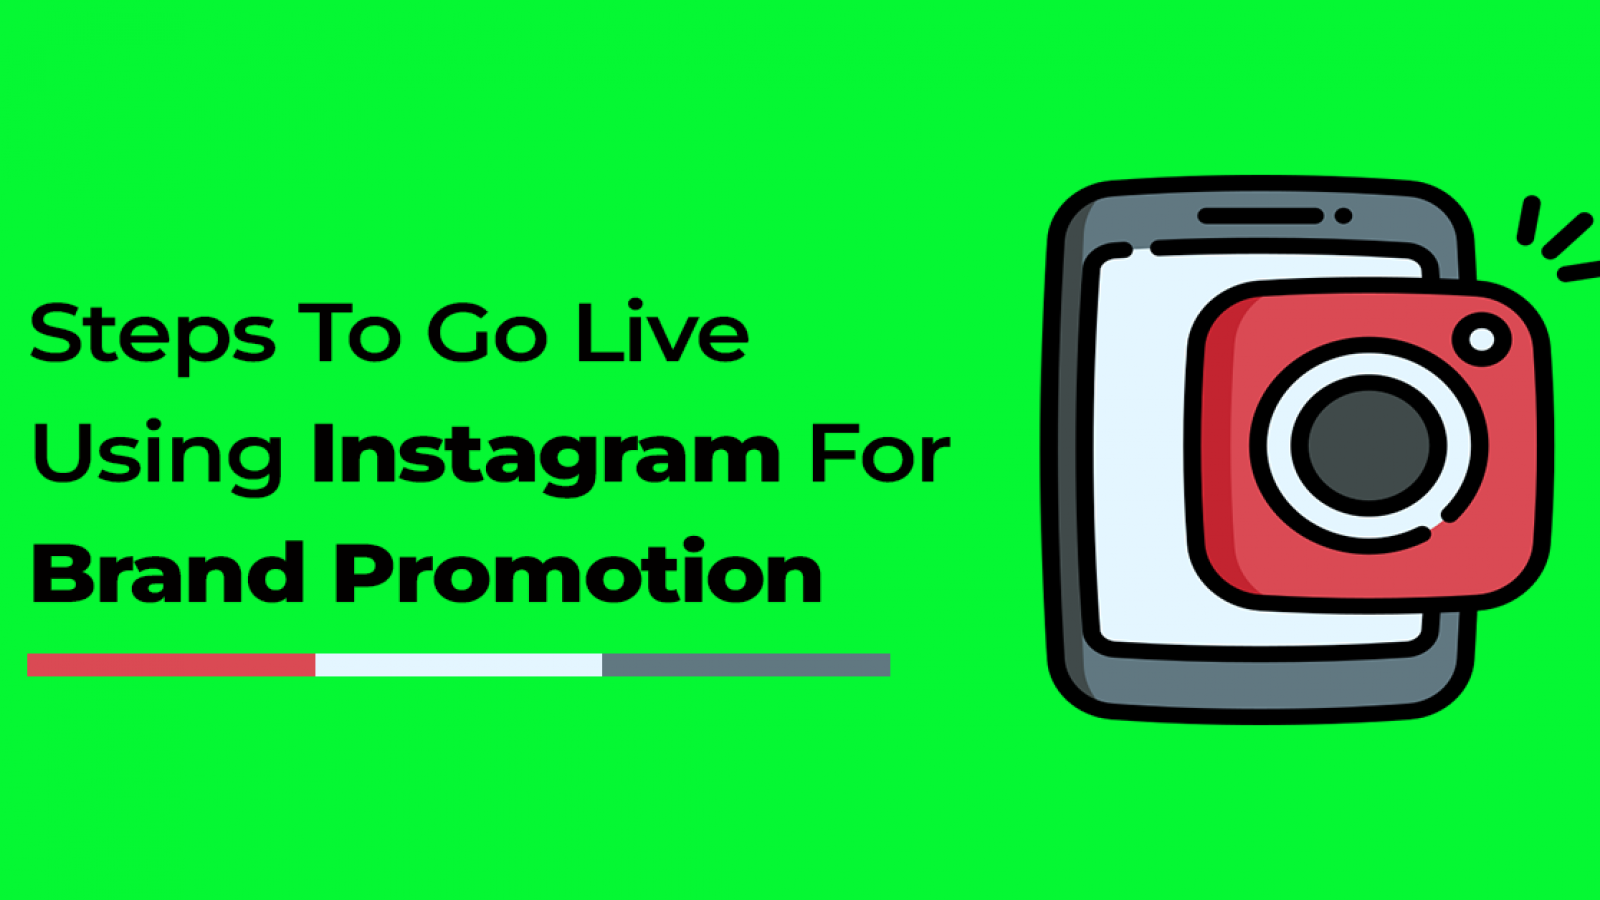 Steps To Go Live Using Instagram For Brand Promotion